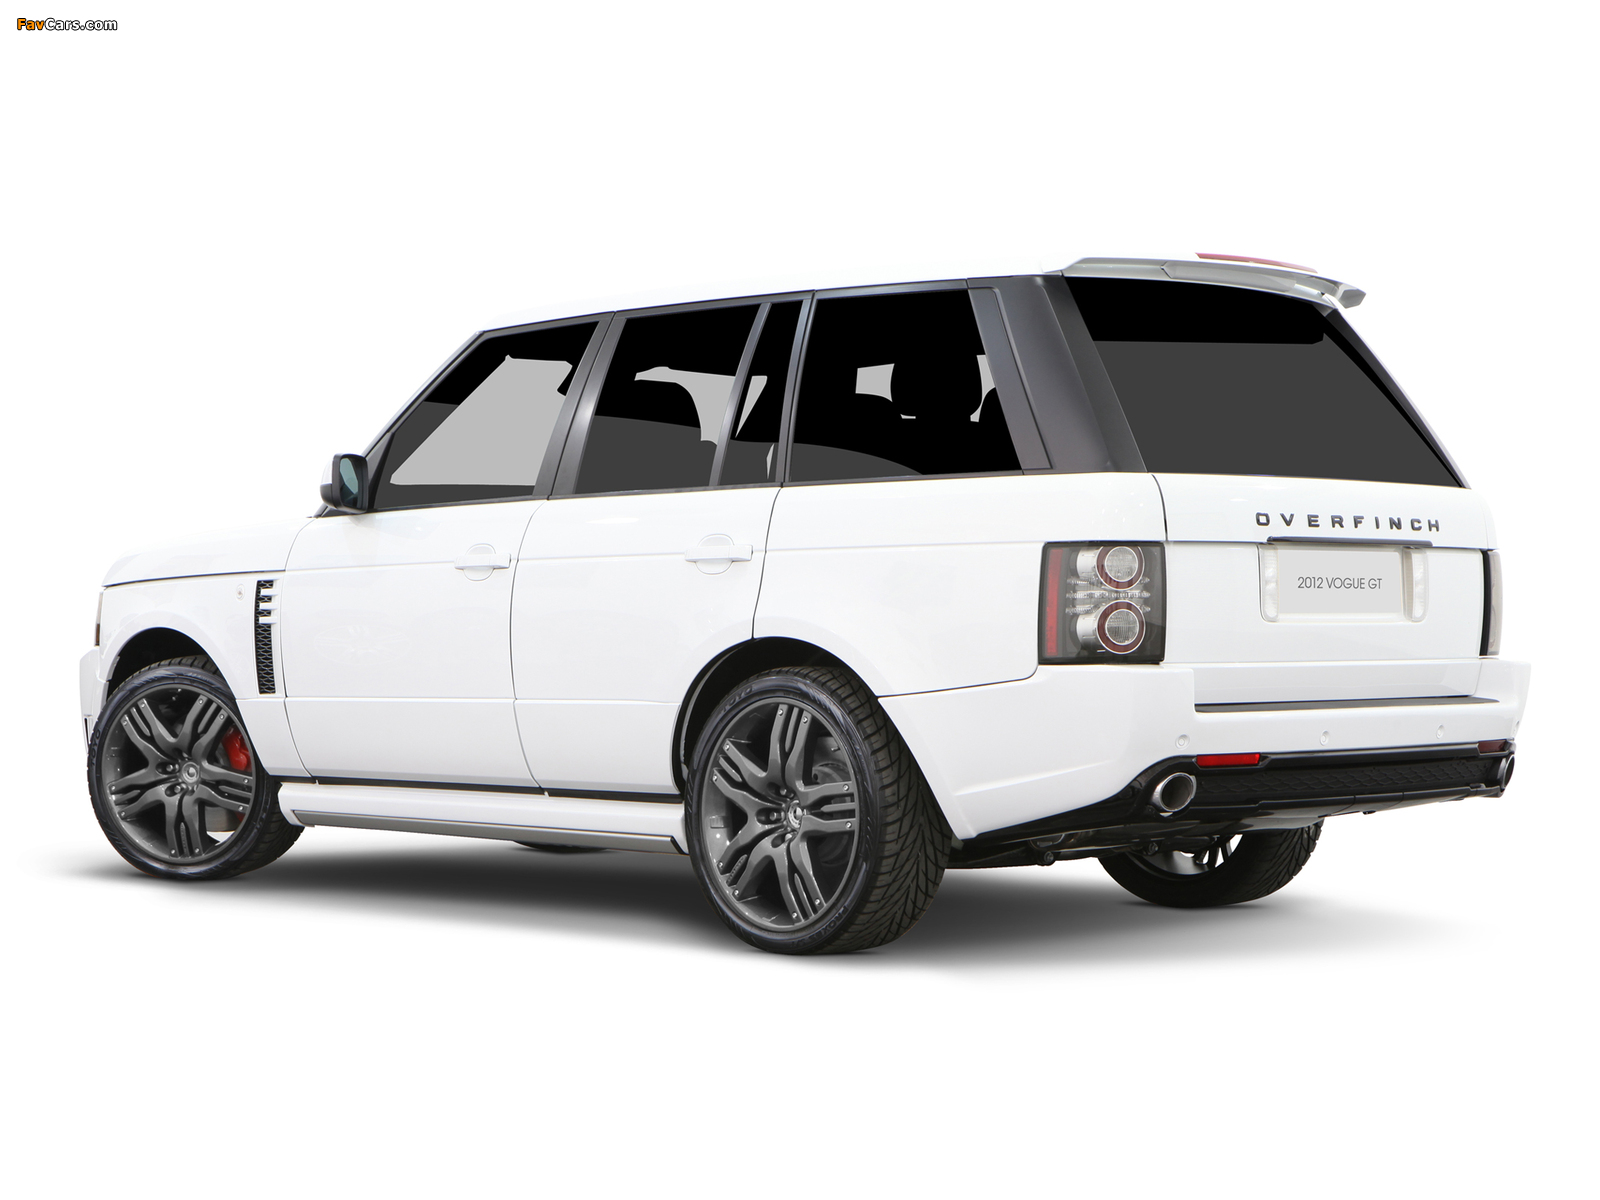 Overfinch Range Rover Vogue GT (L322) 2012 images (1600 x 1200)